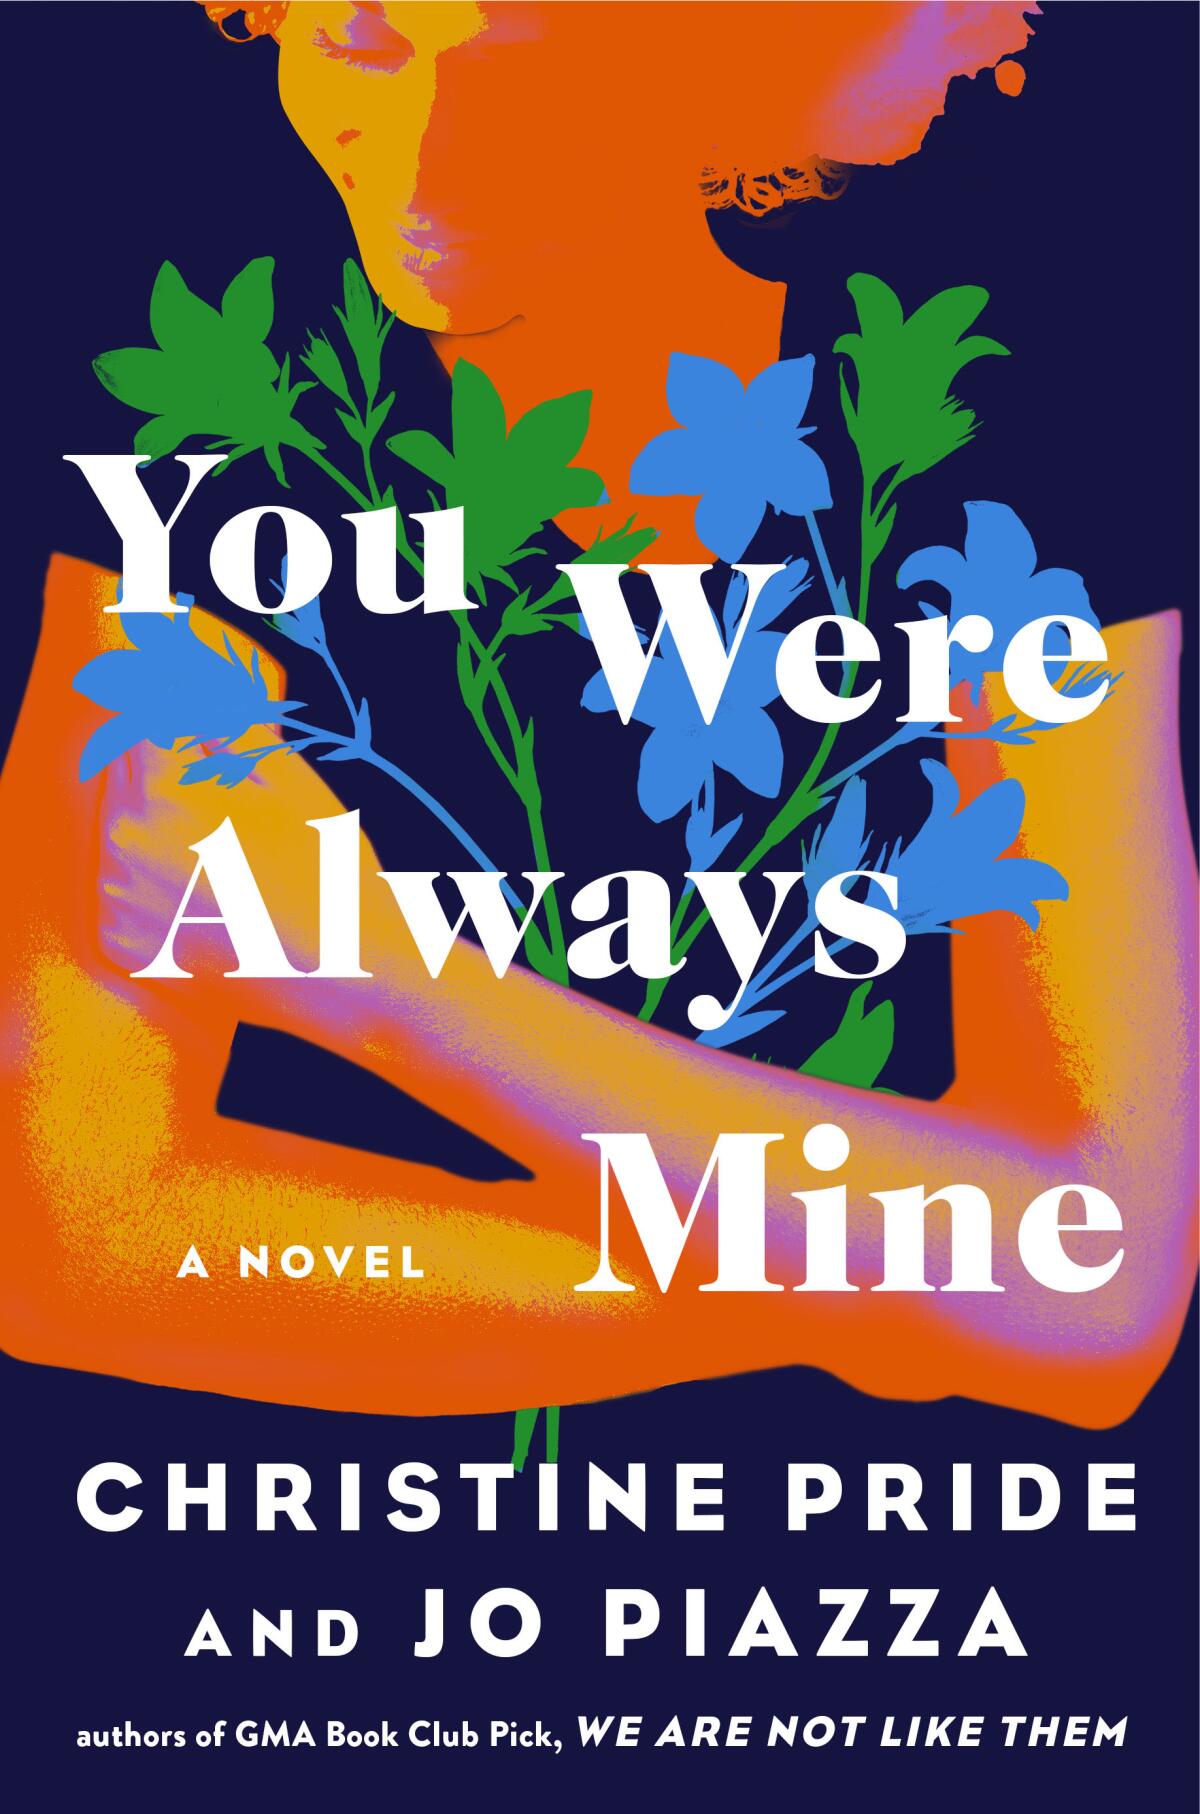 The cover of the book 'You Were Always Mine,' by Christine Pride and Jo Piazza